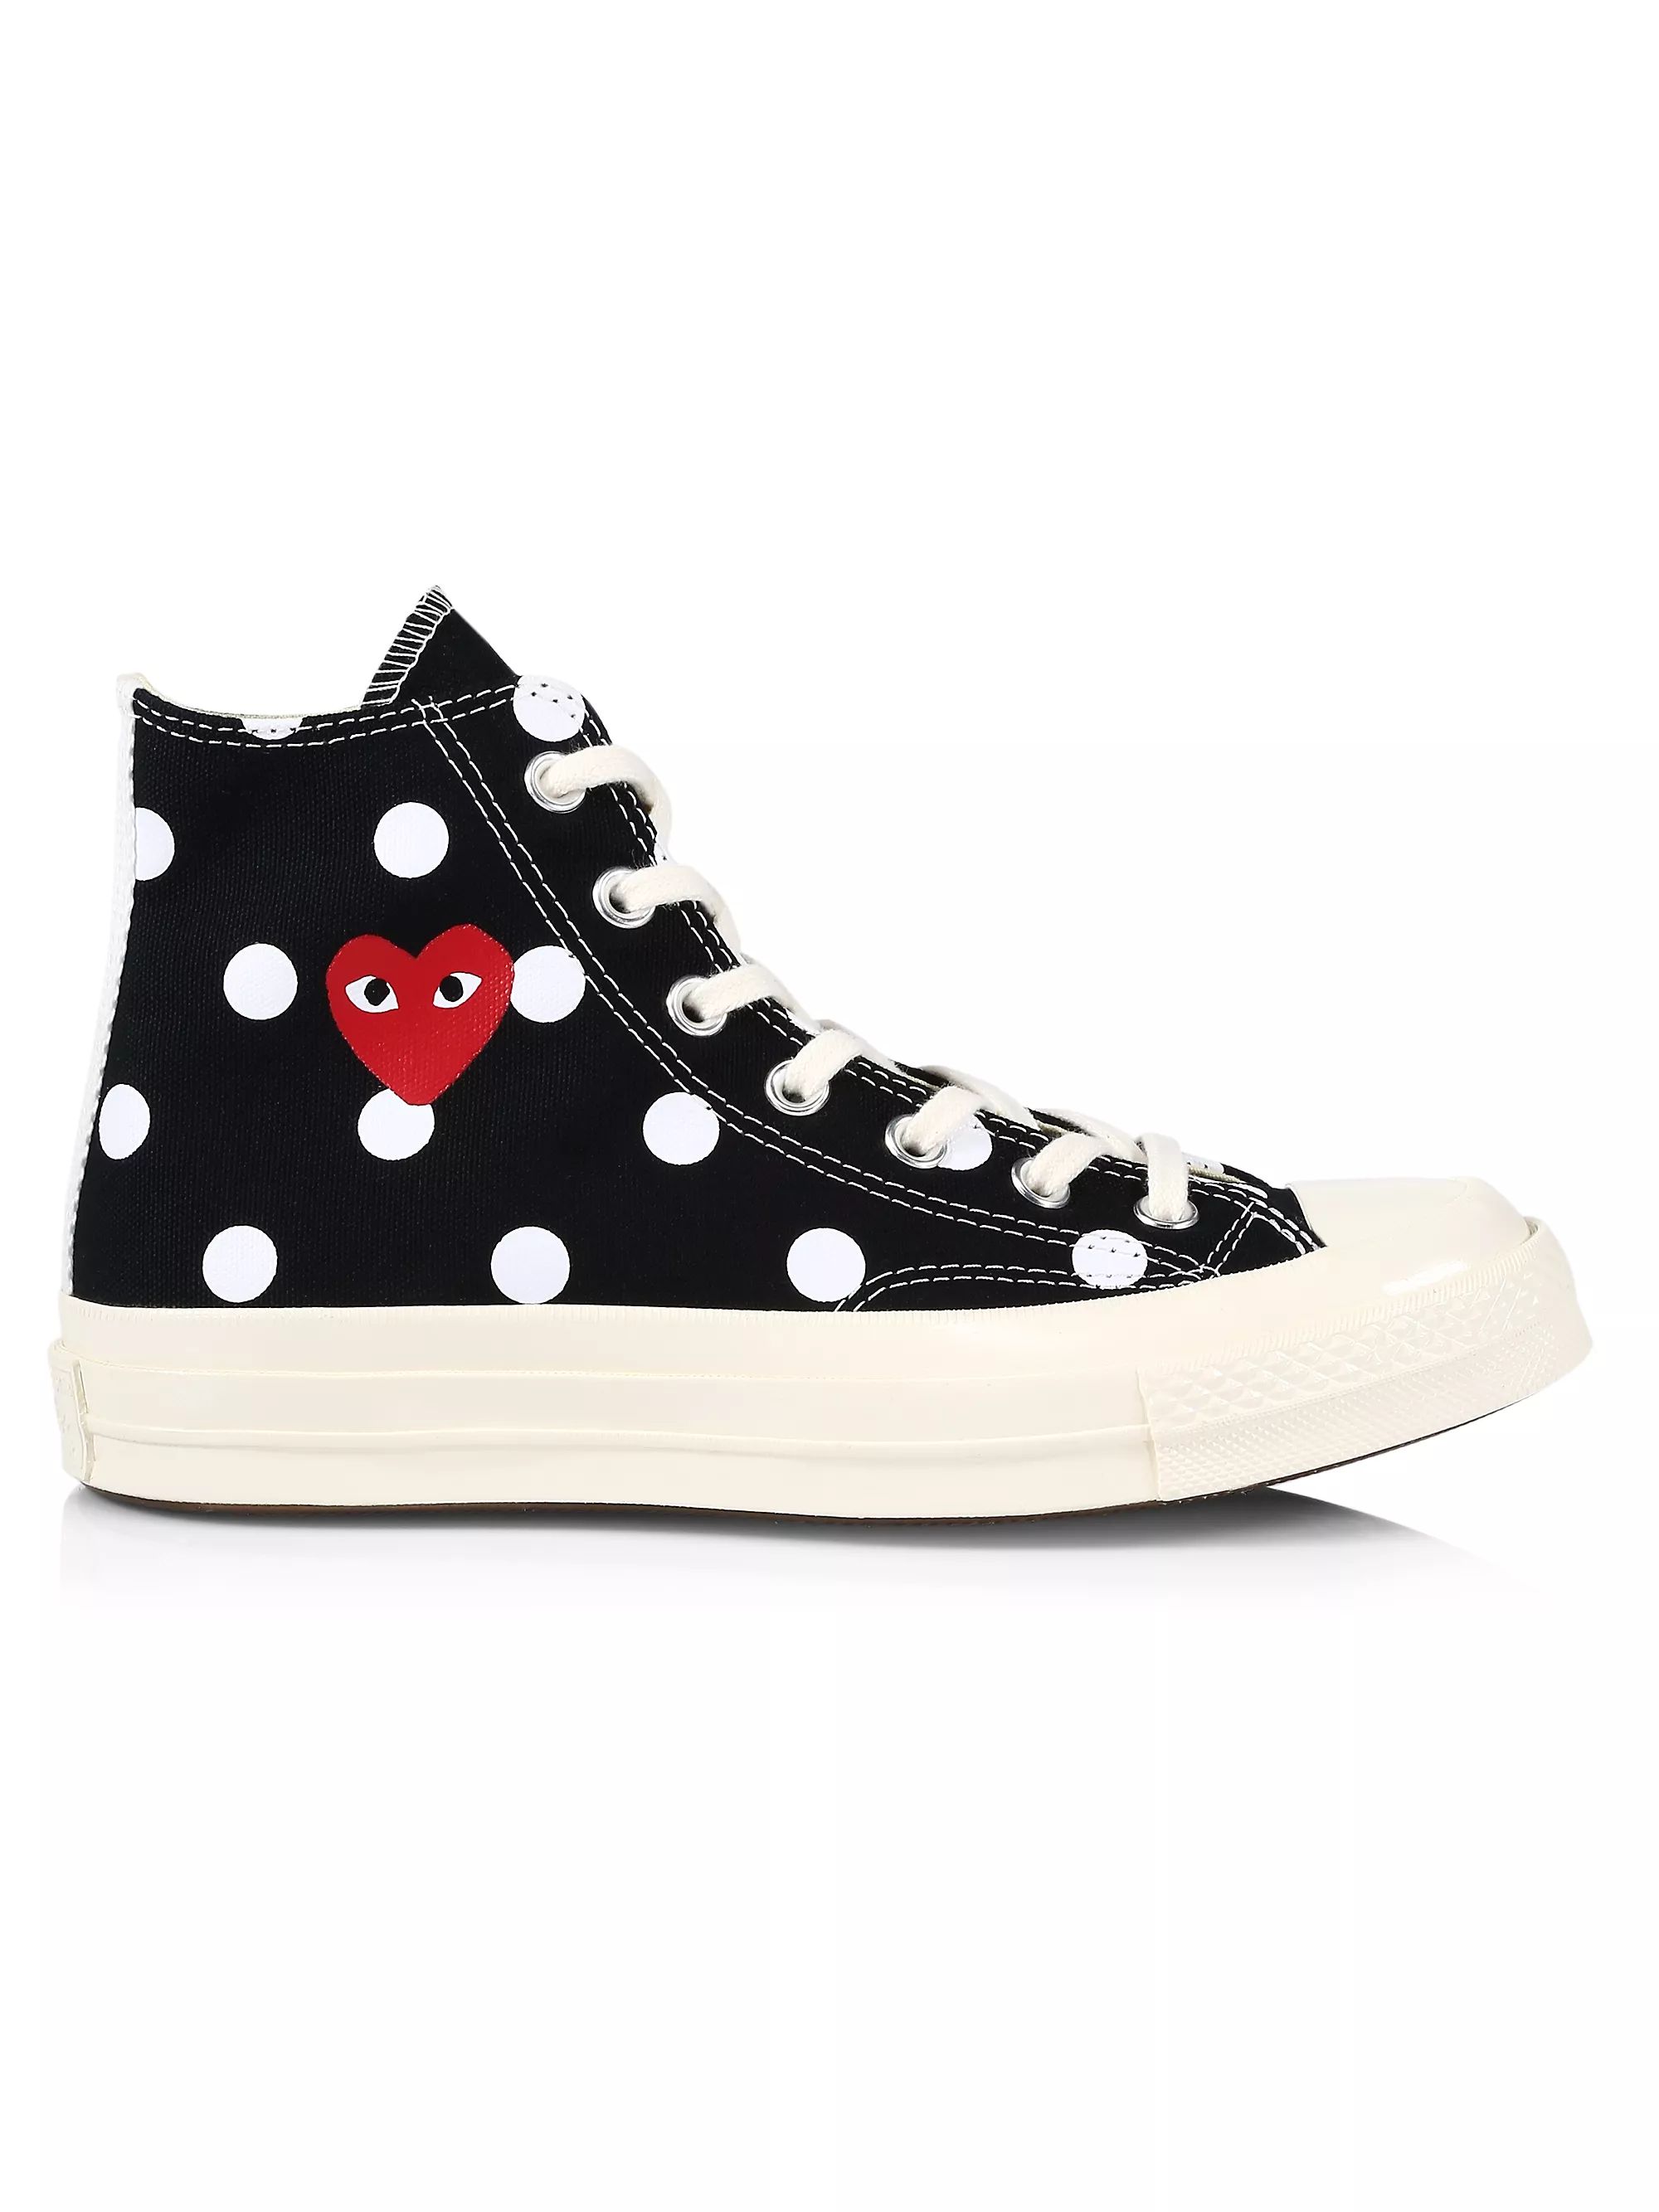 CdG PLAY x Converse Unisex Chuck Taylor All Star Polka Dot High-Top Sneakers | Saks Fifth Avenue